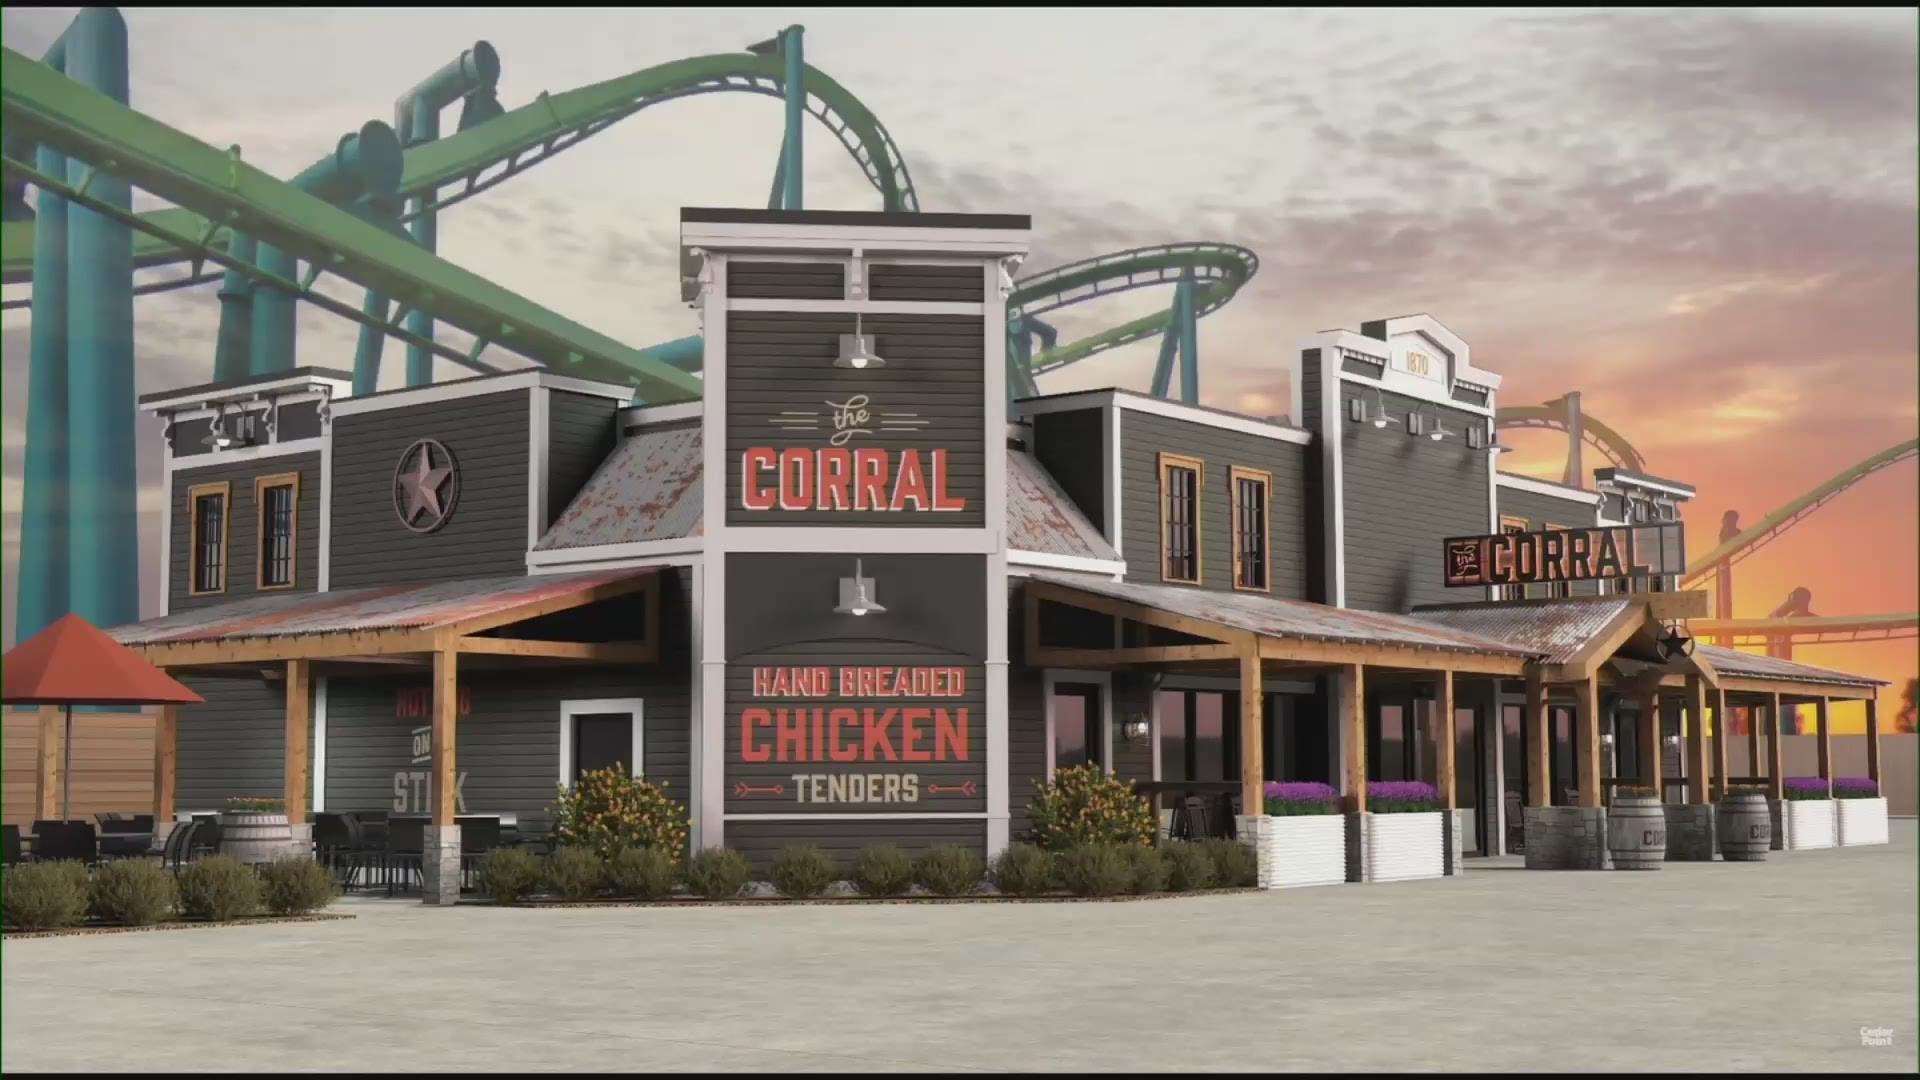 Cedar Point has revealed big changes coming to their food lineup for the 2020 season. Guests will see a renovated Corral restaurant and French Quarter Confections.